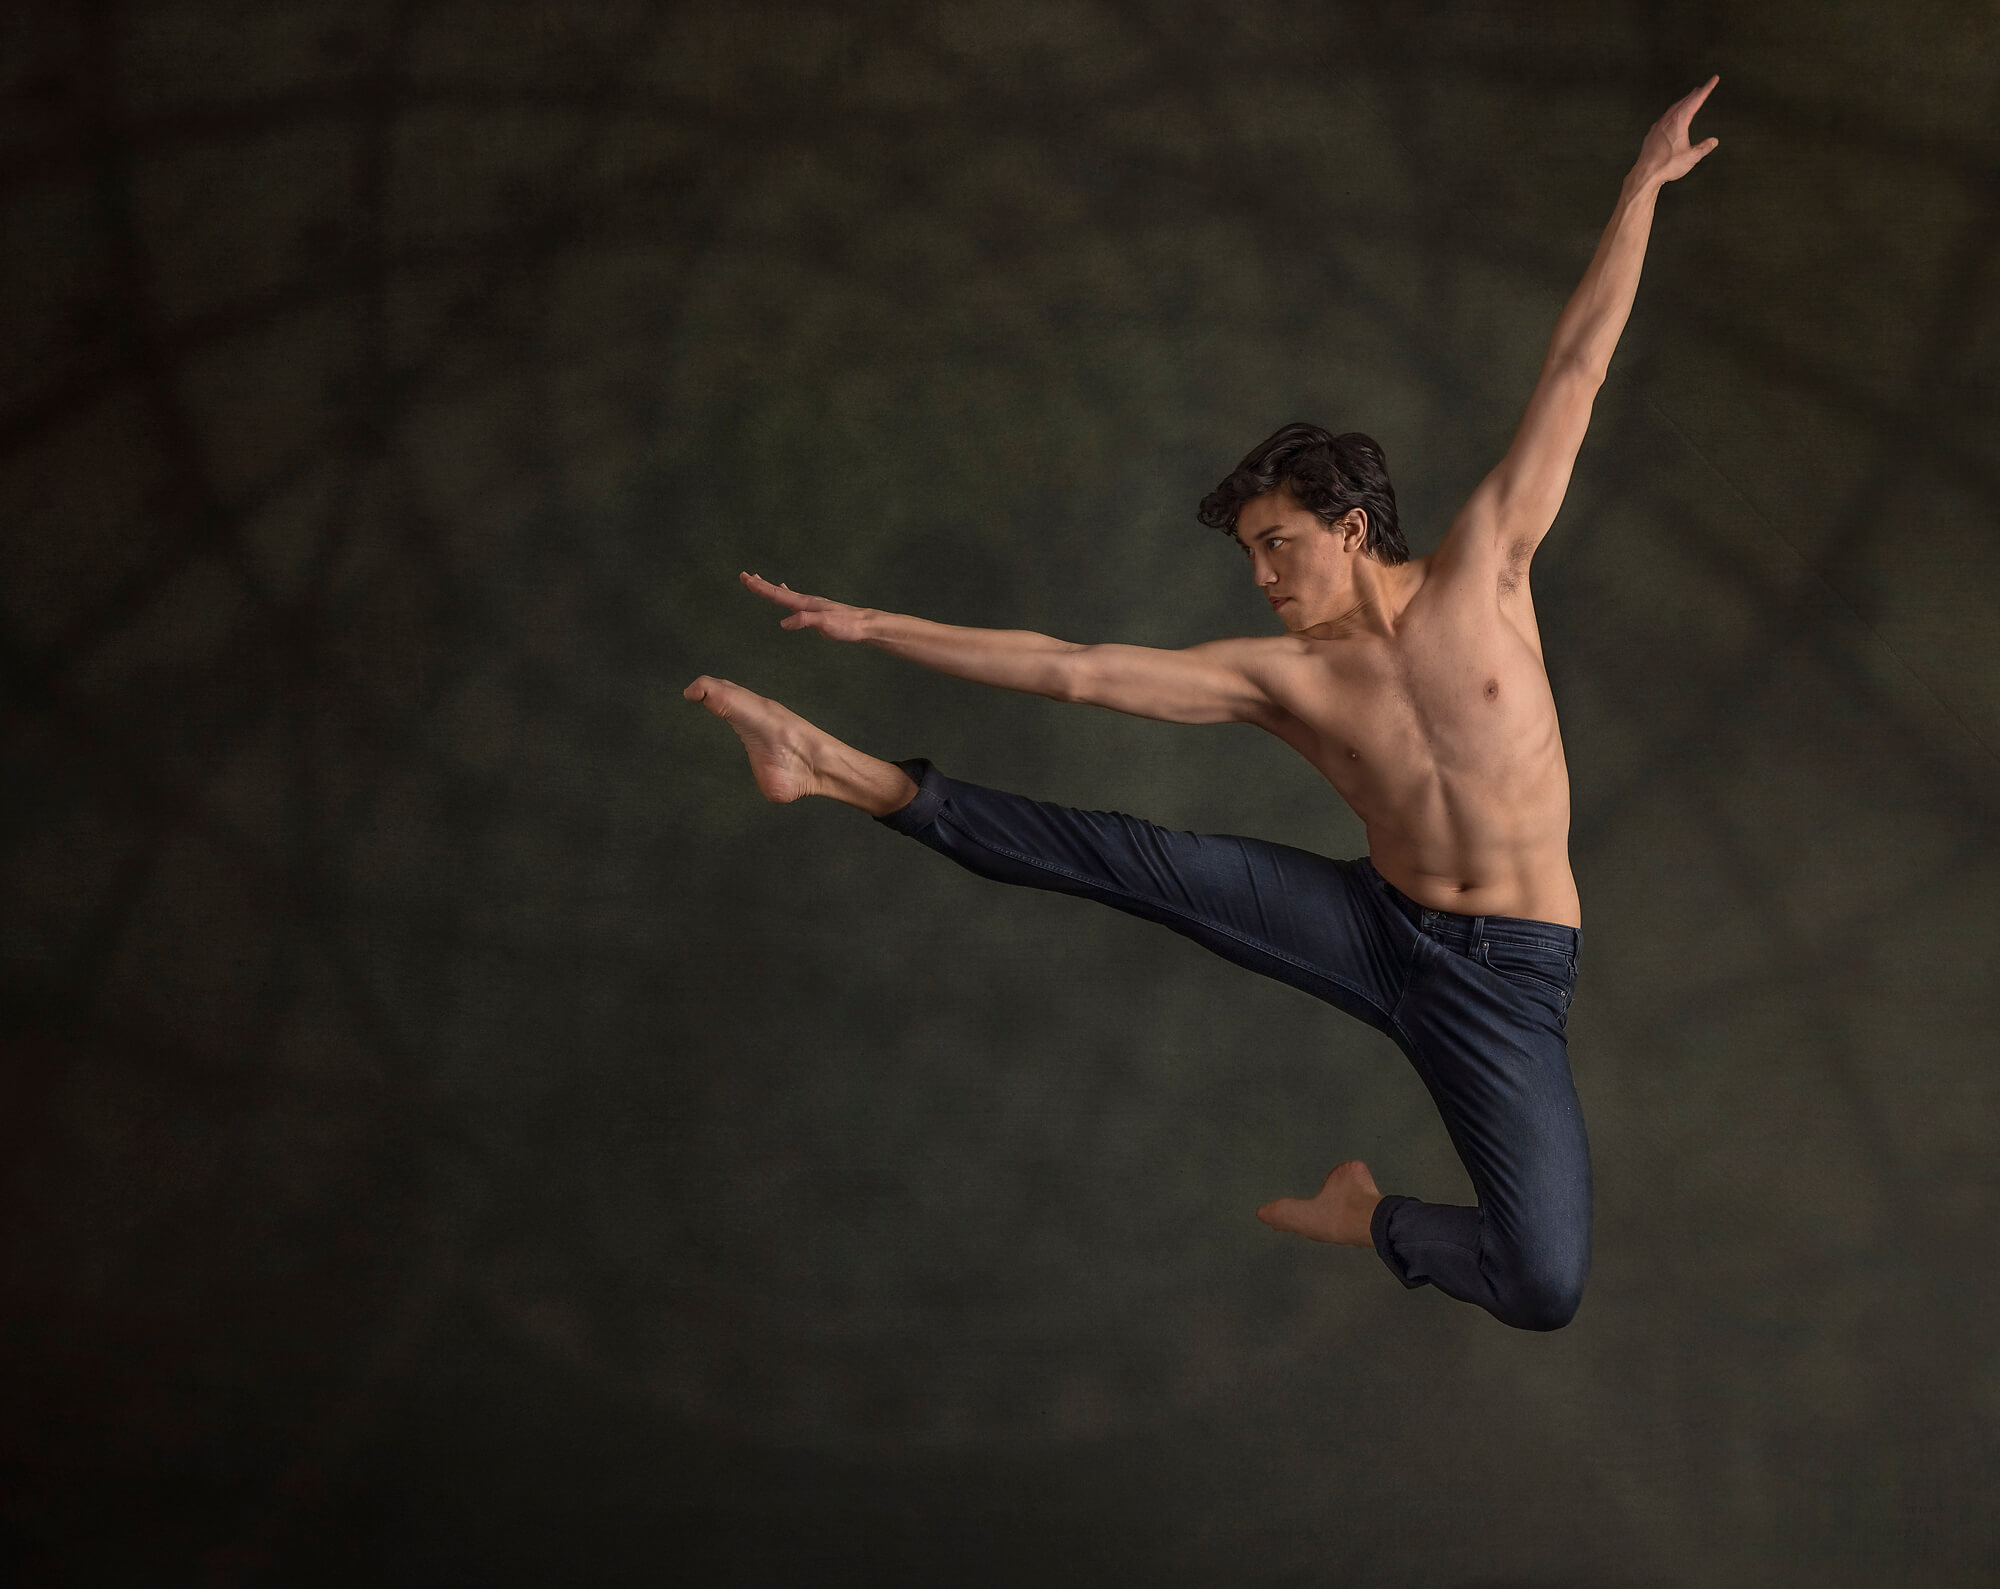 CA male dancer jumping in portrait studio wearing jeans and no shirt